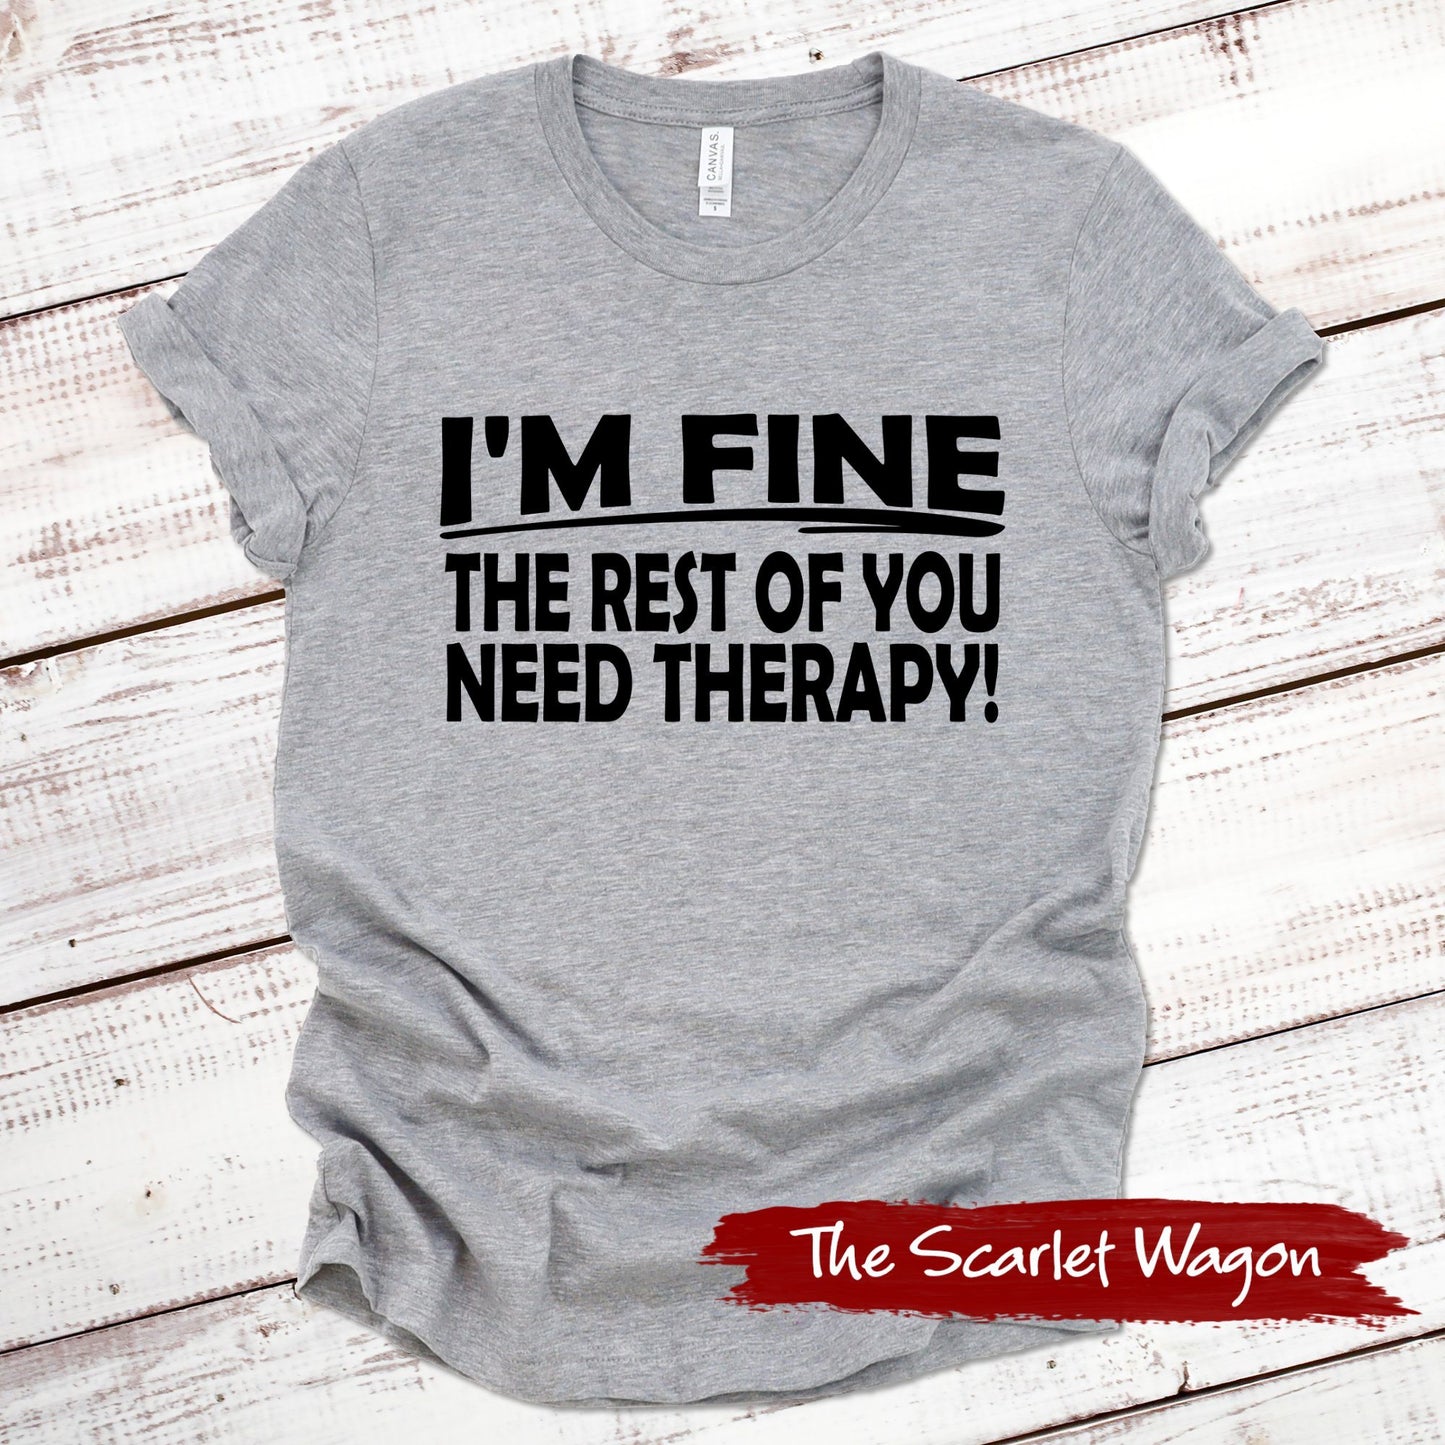 I'm Fine the Rest of You Need Therapy Funny Shirt Scarlet Wagon Athletic Heather XS 